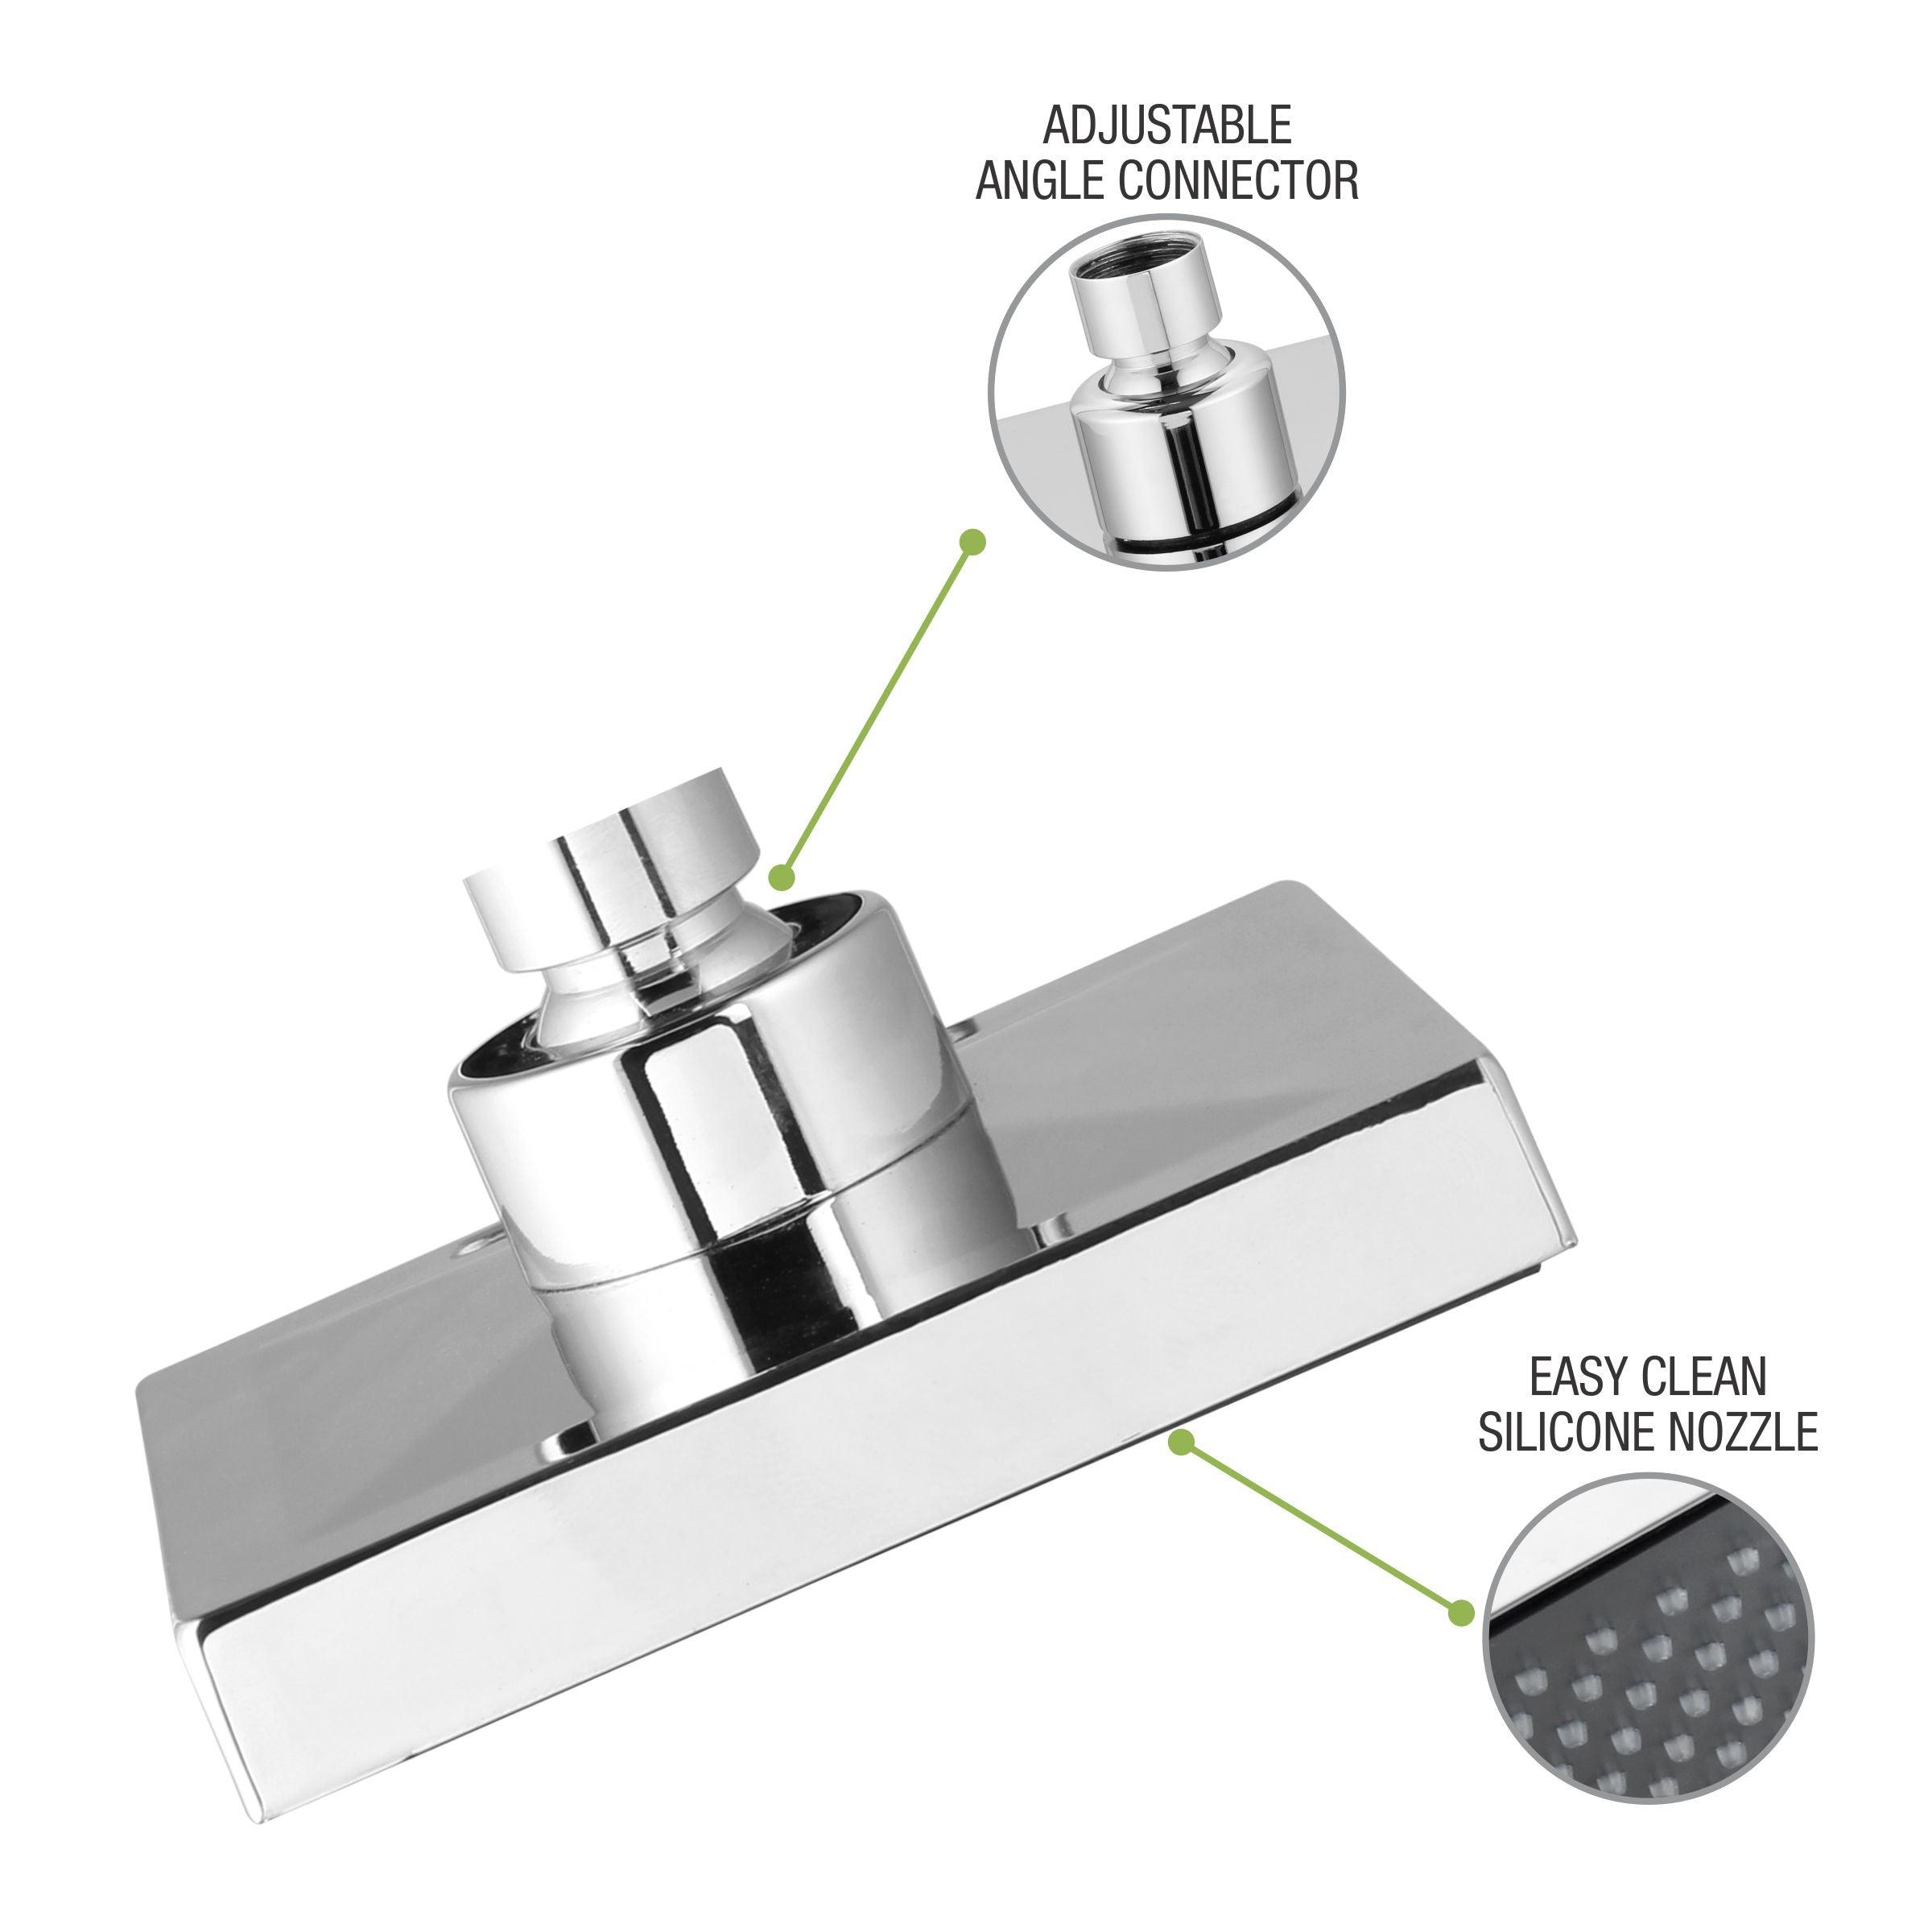 Jaq Overhead Shower (4 x 4 Inches) features